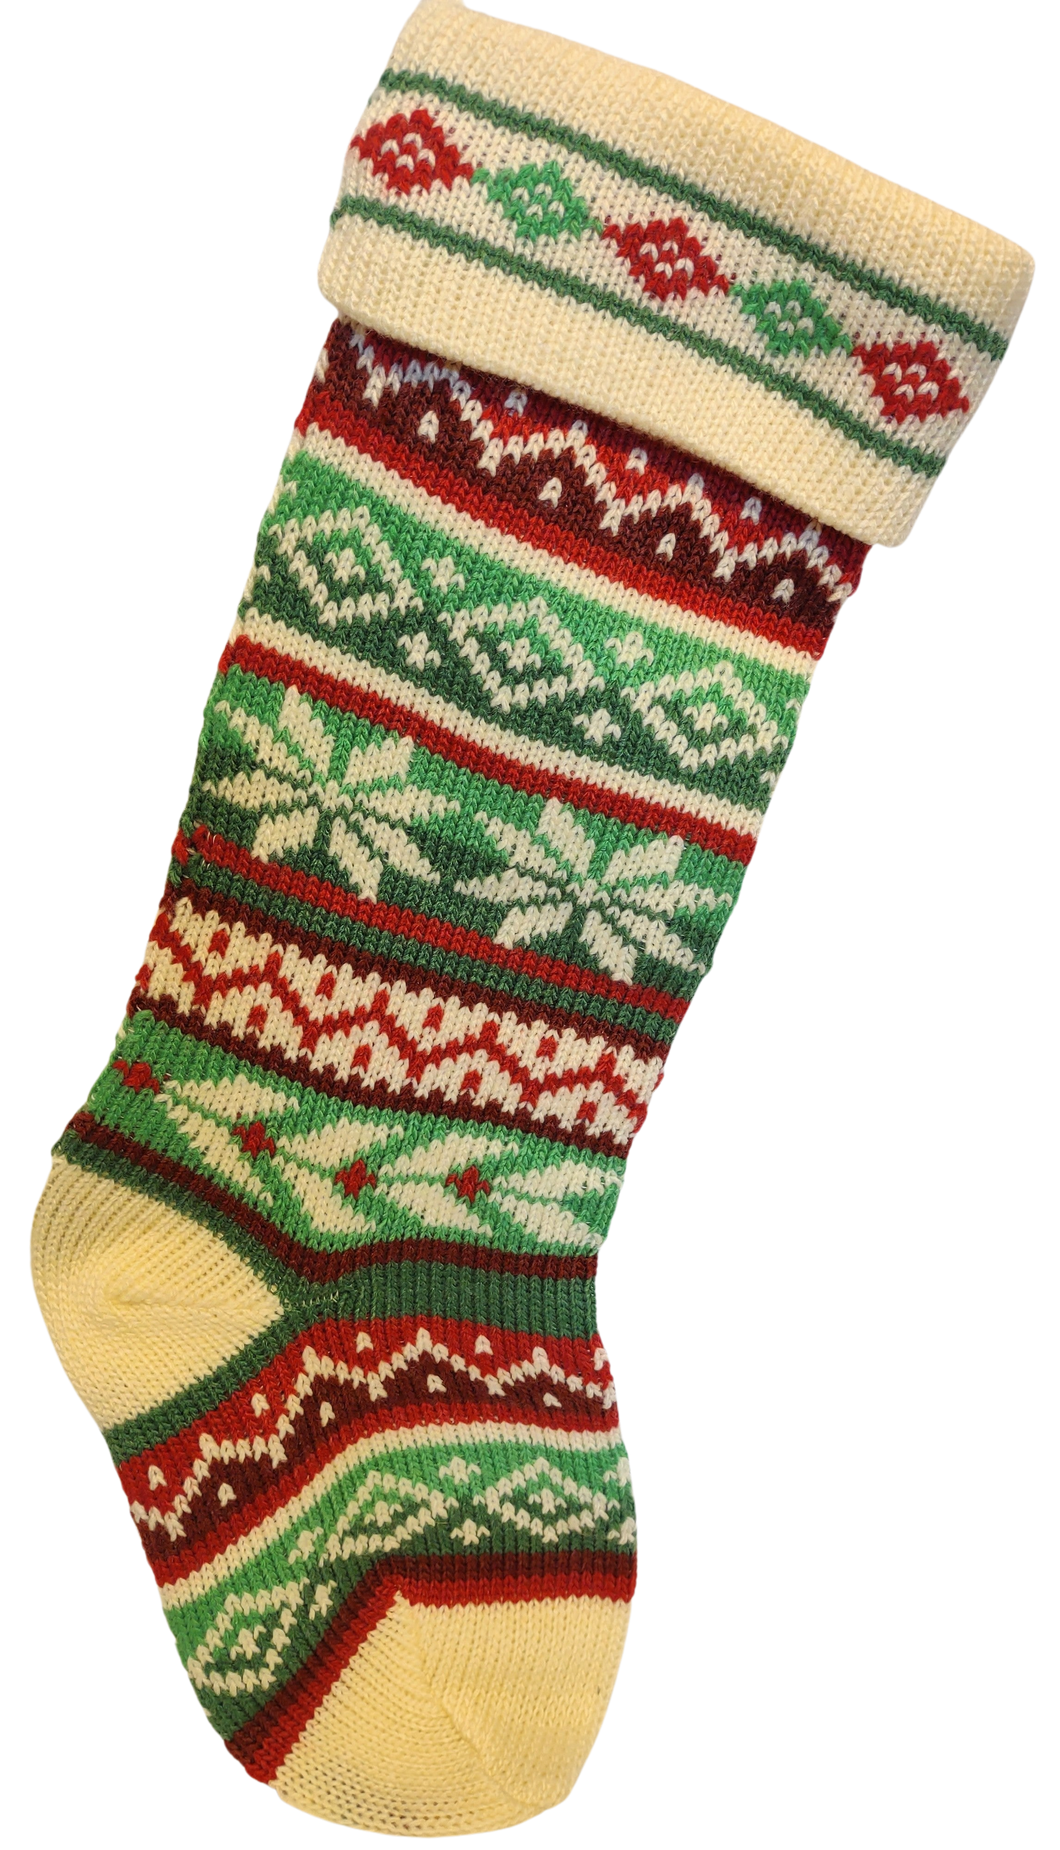 Red/Green/White Heavy Knit Stocking with Snowflakes 20